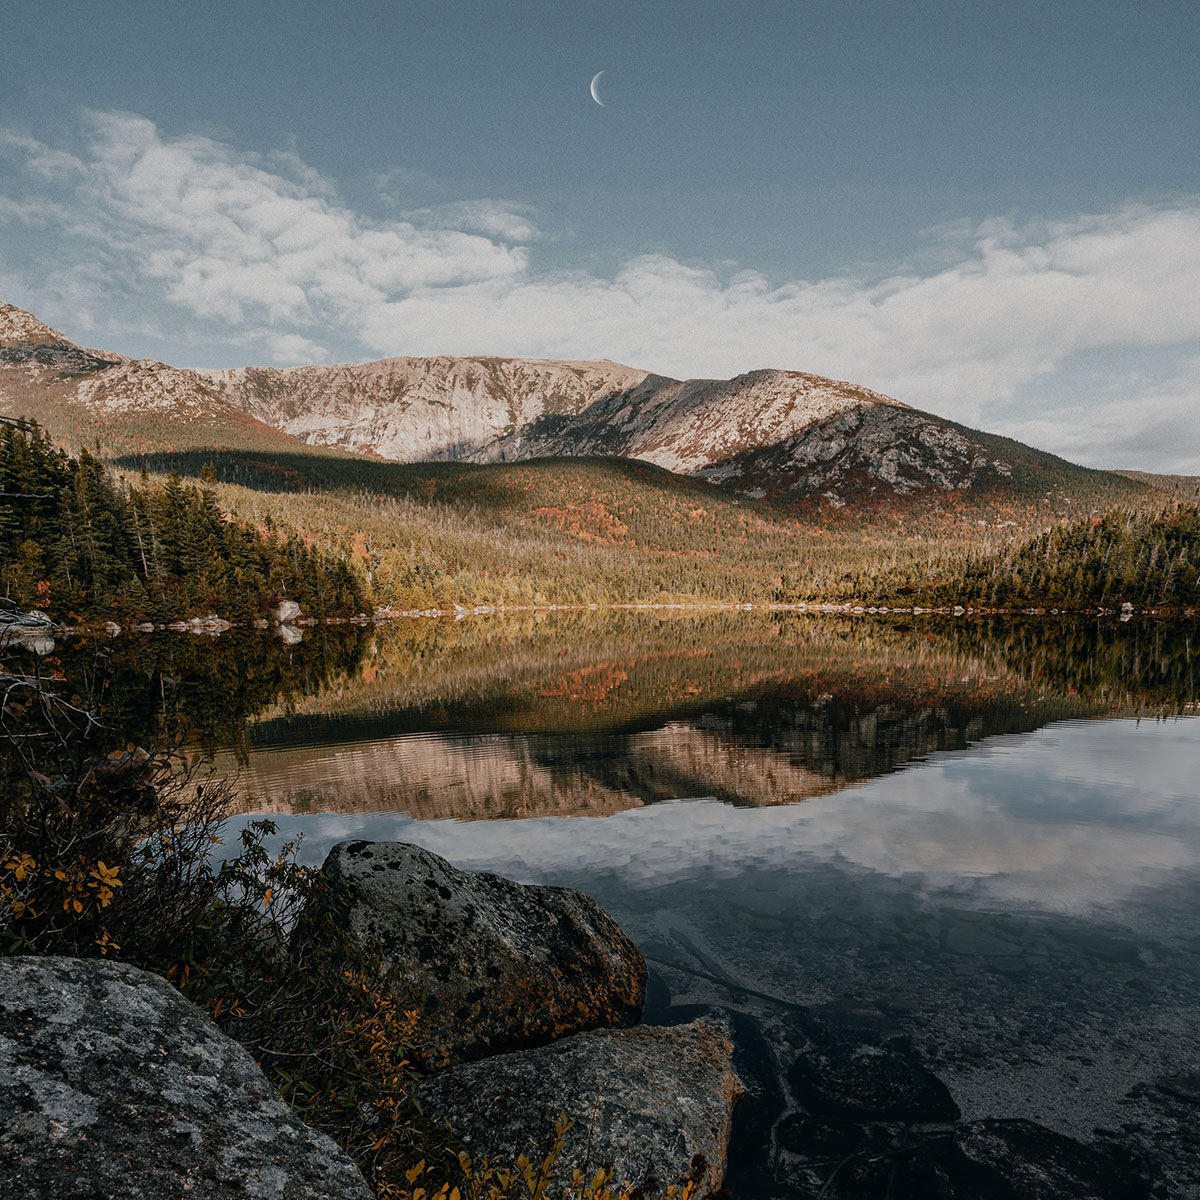 Mountains Reflected on Lake in Baxter State Park, Maine